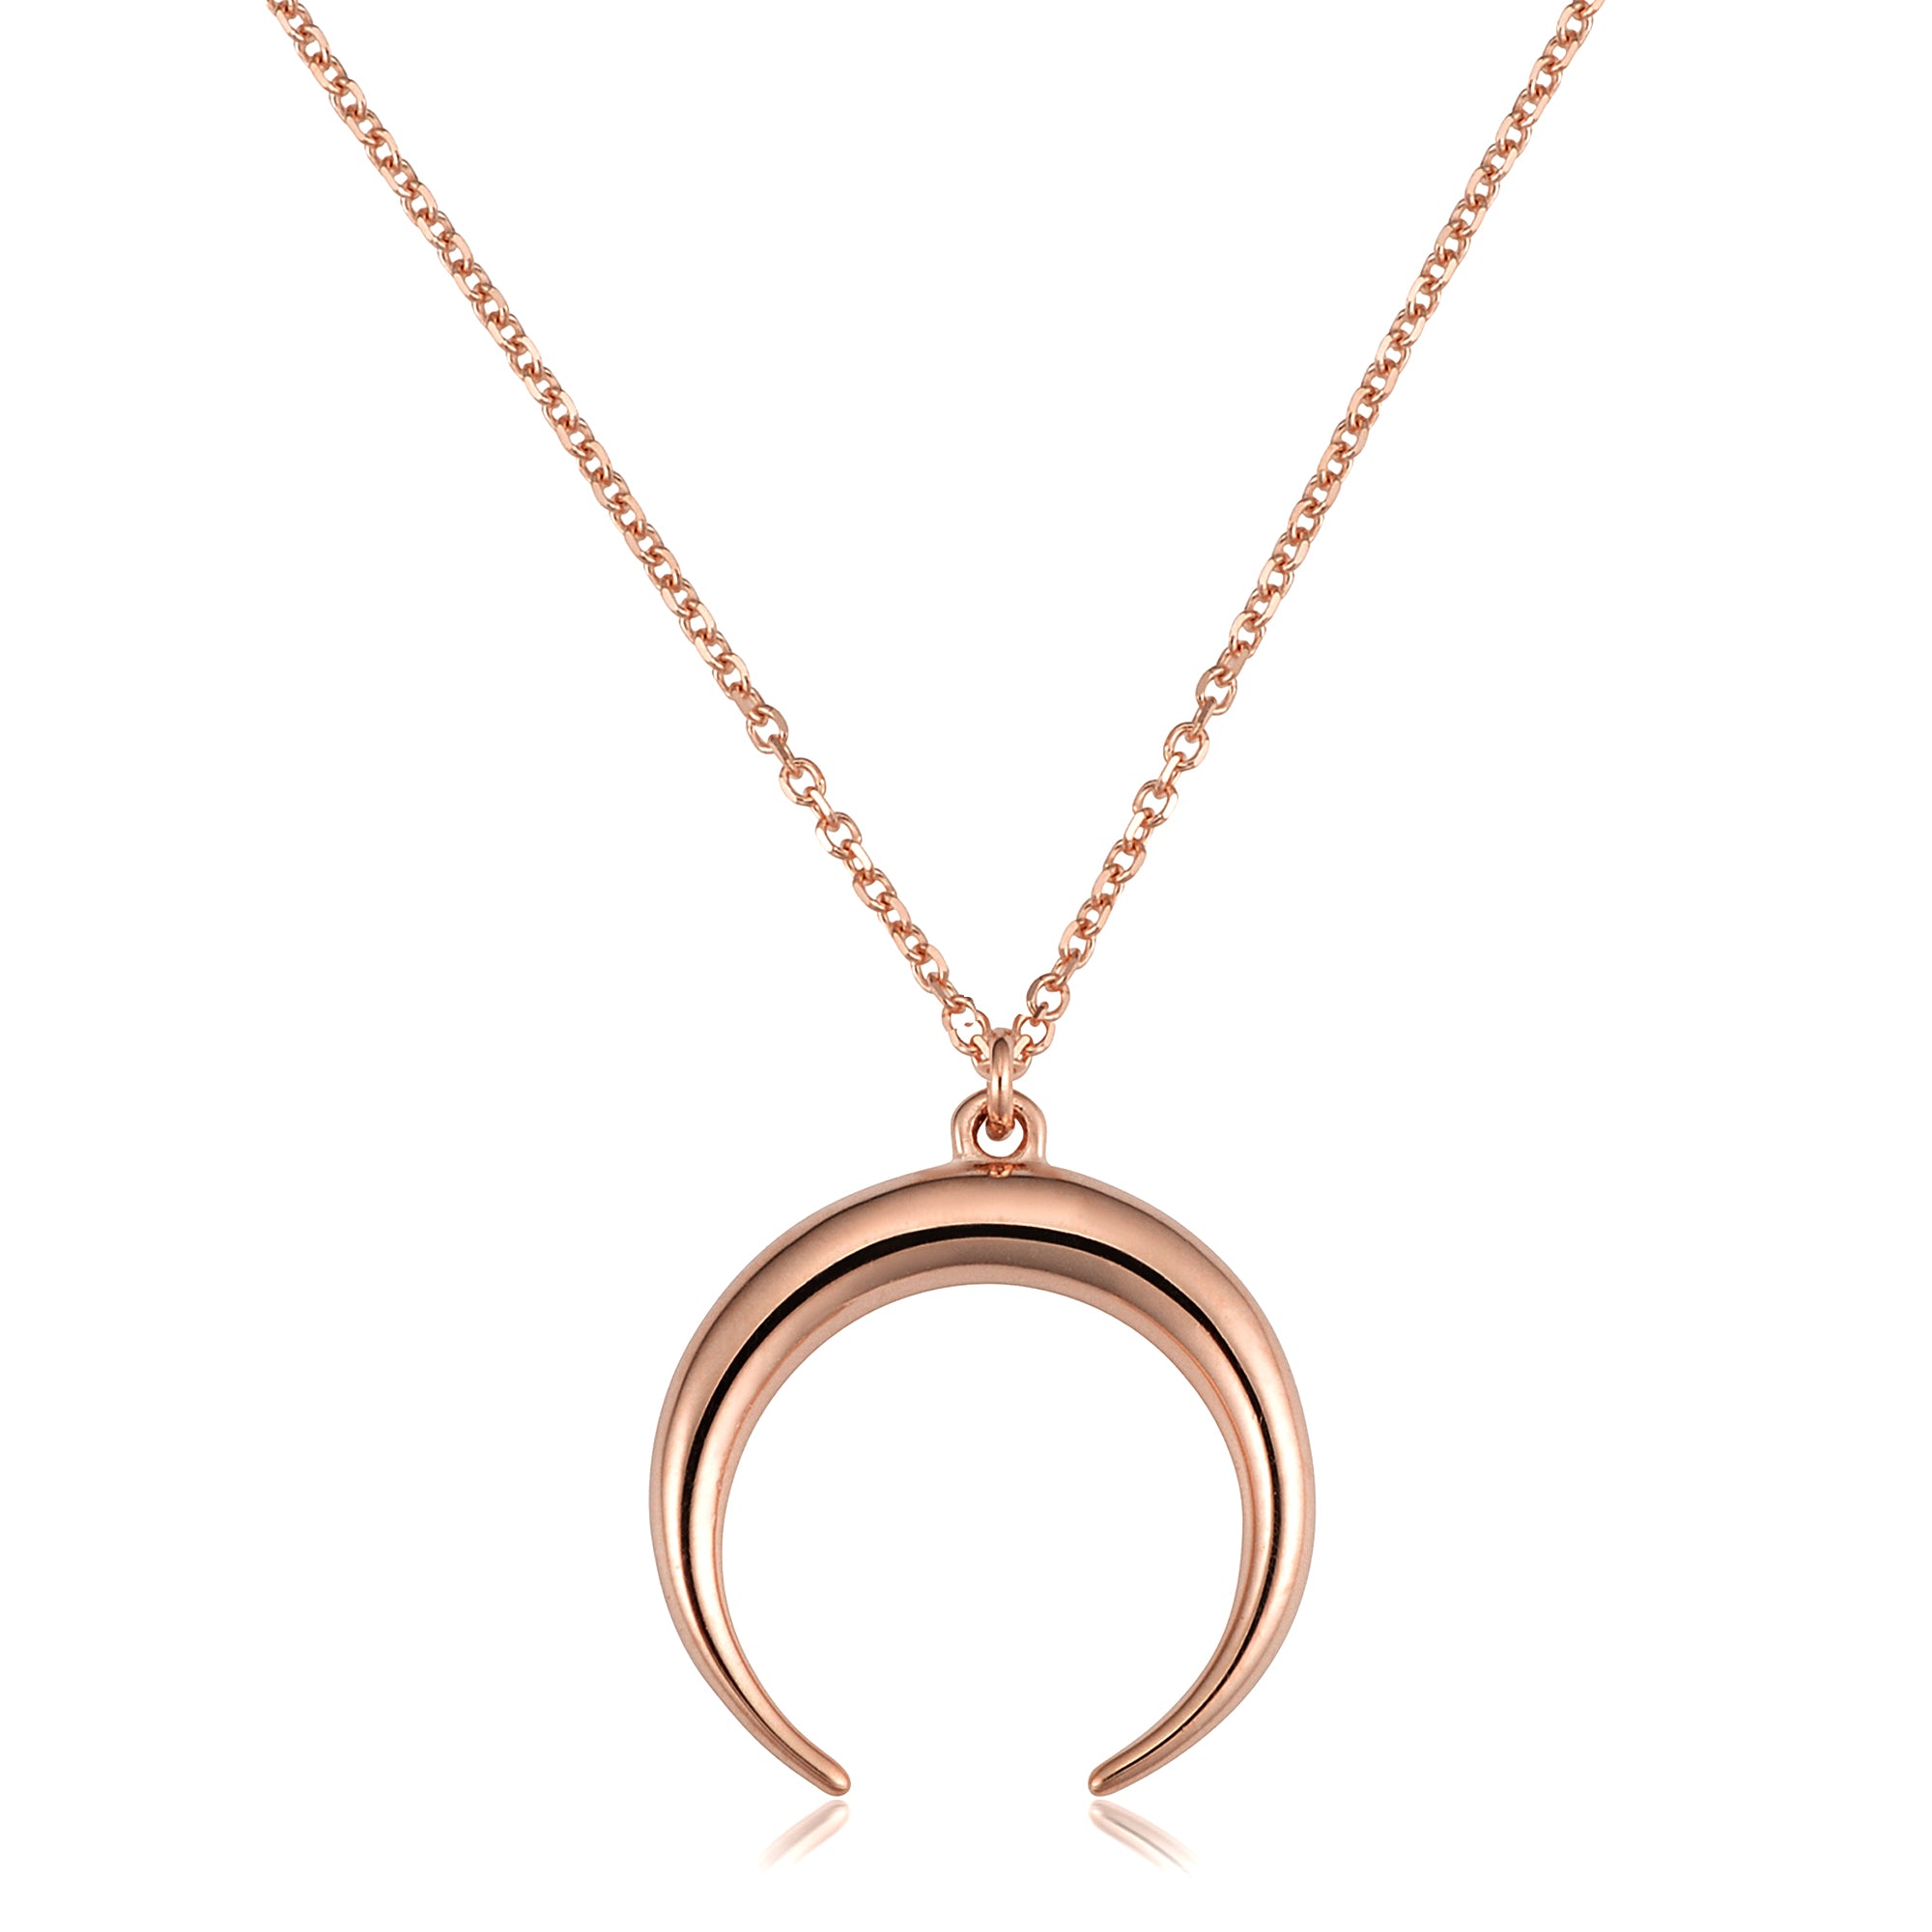 14K Gold Crescent Moon Pendant Necklace, 18" fine designer jewelry for men and women